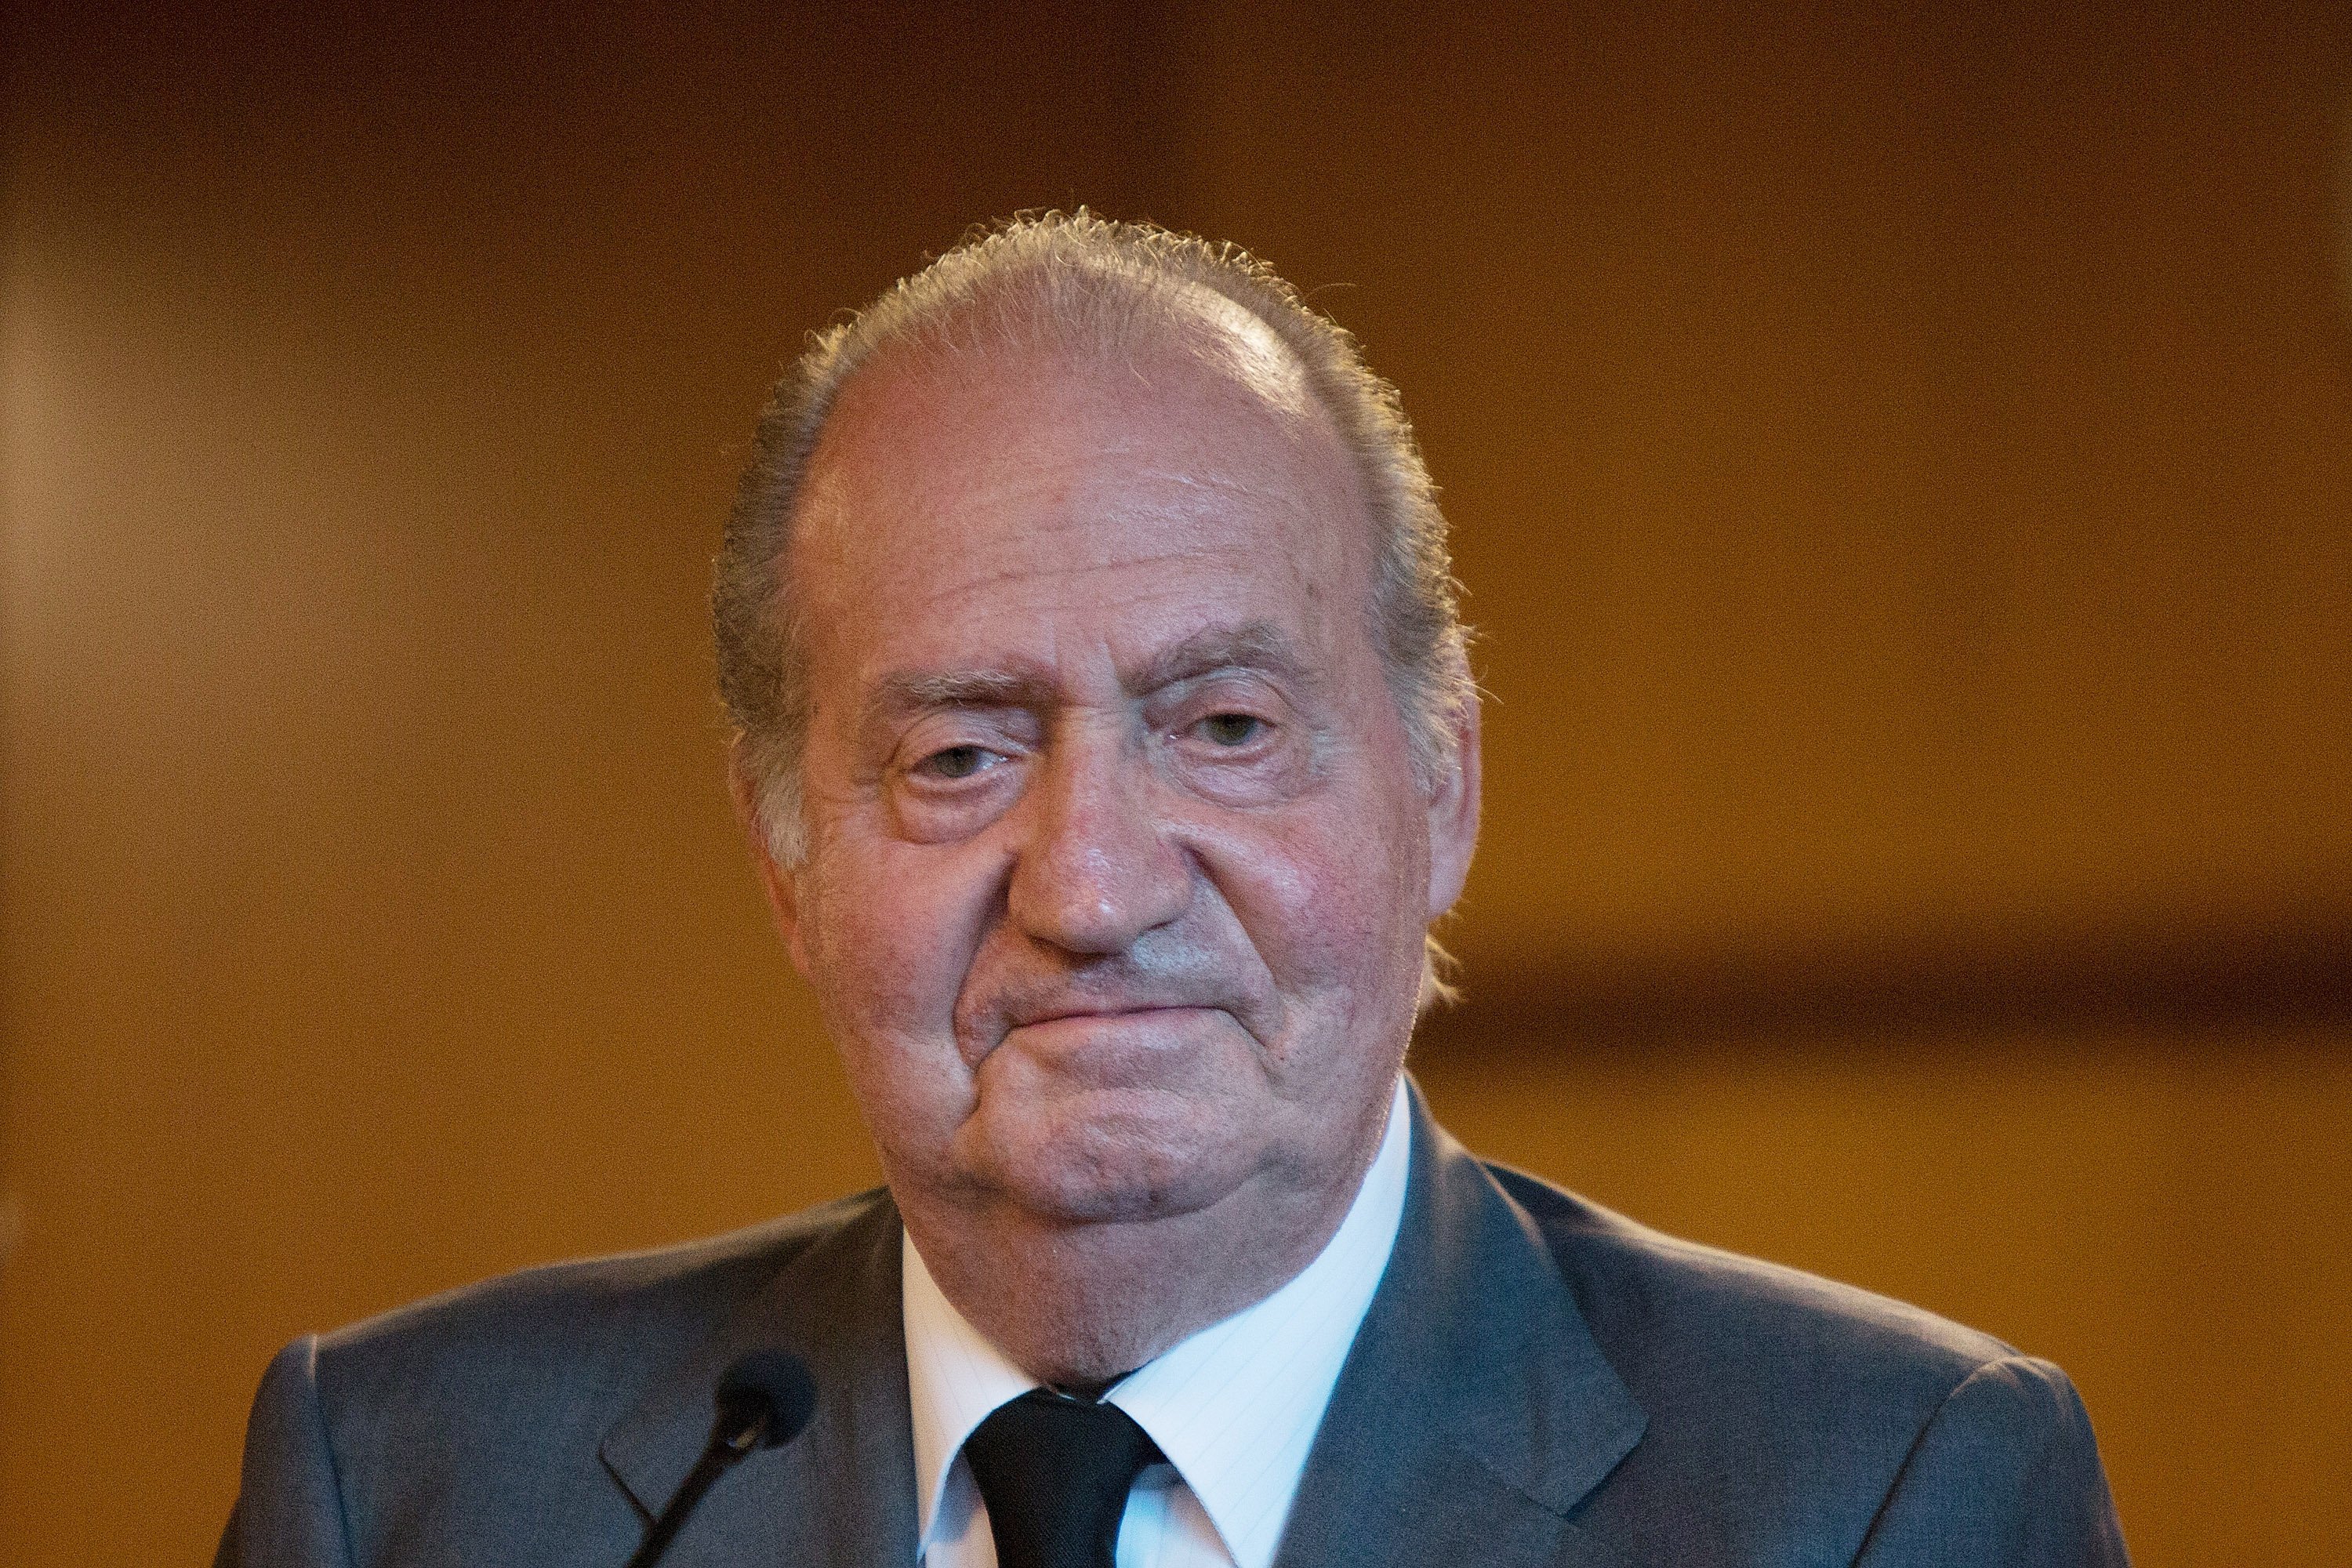 King Juan Carlos of Spain at Clinico Hospital after a train crash on July 25, 2013, in Santiago de Compostela, Spain | Source: Getty Images